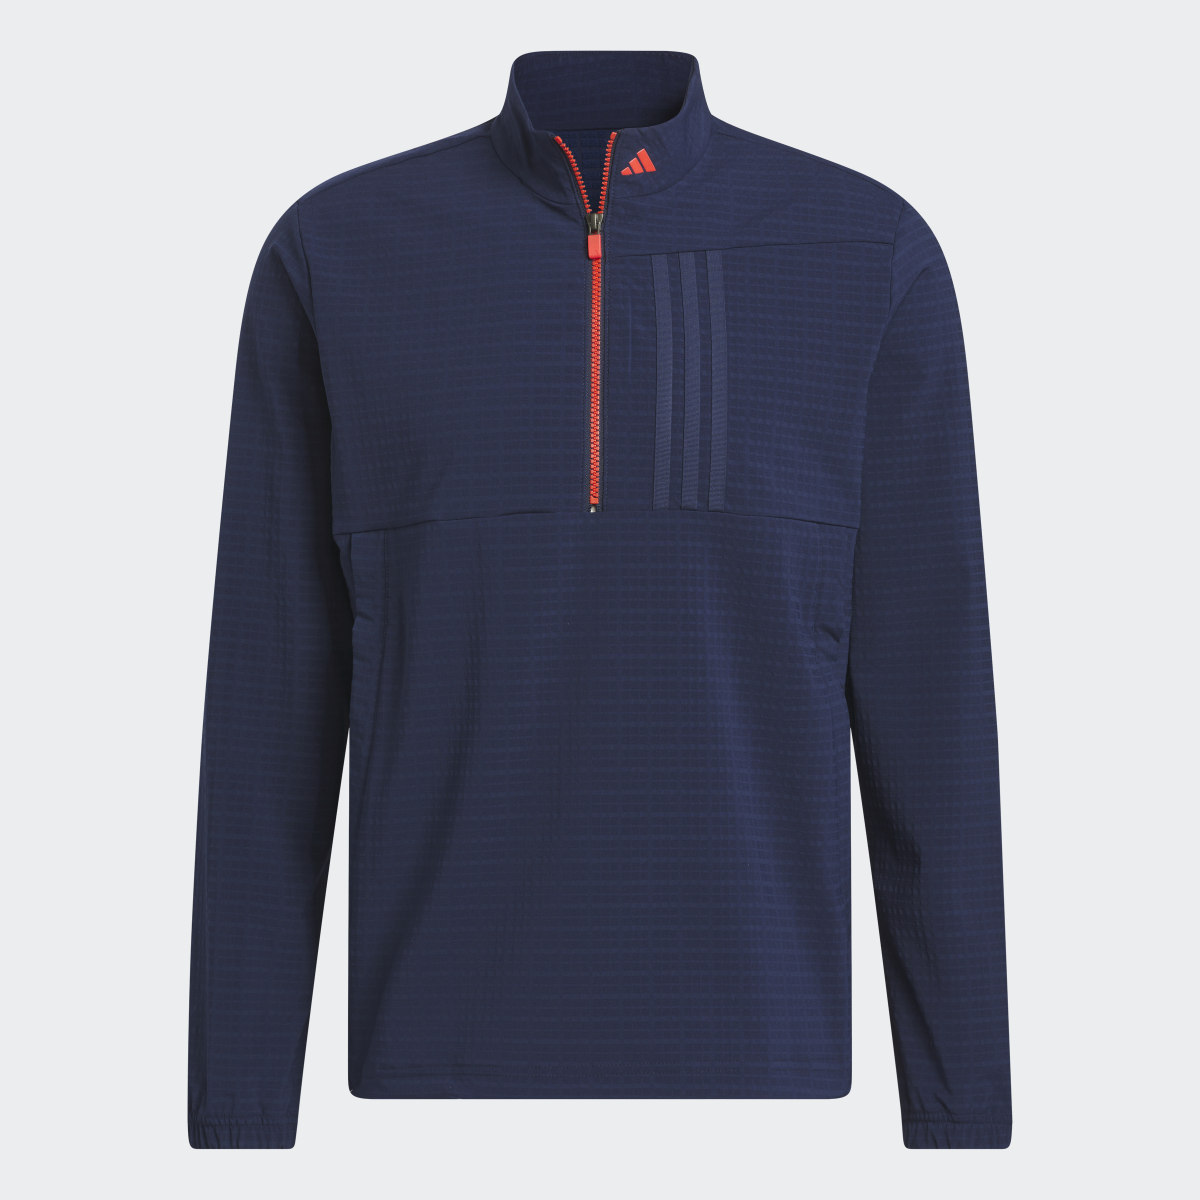 Adidas Ultimate365 Tour WIND.RDY Half-Zip Pullover. 5